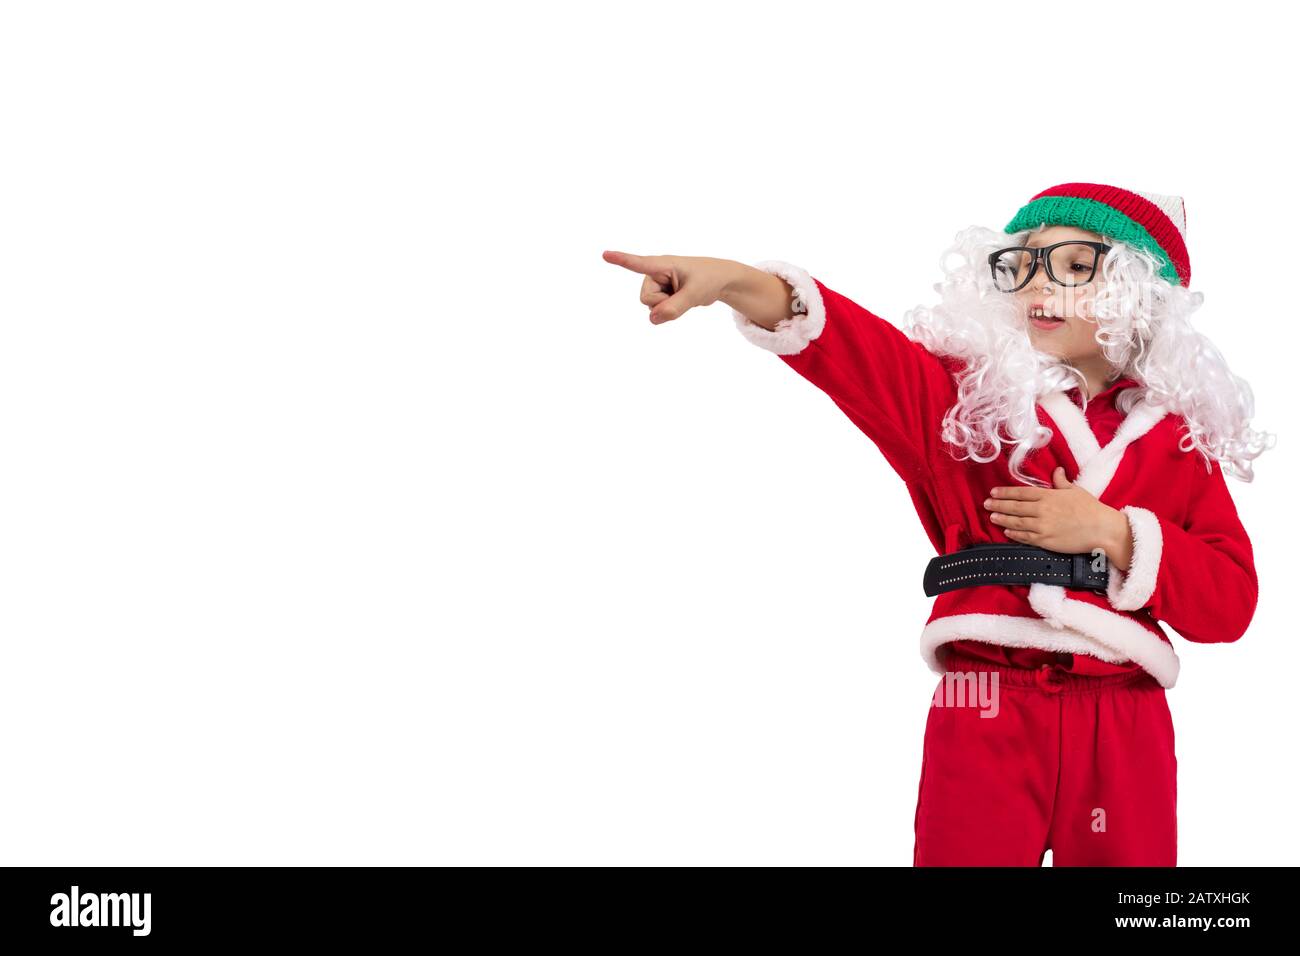 Child Santa Claus on a white background shows a finger. Christmas boy.Christmas holidays concept Stock Photo